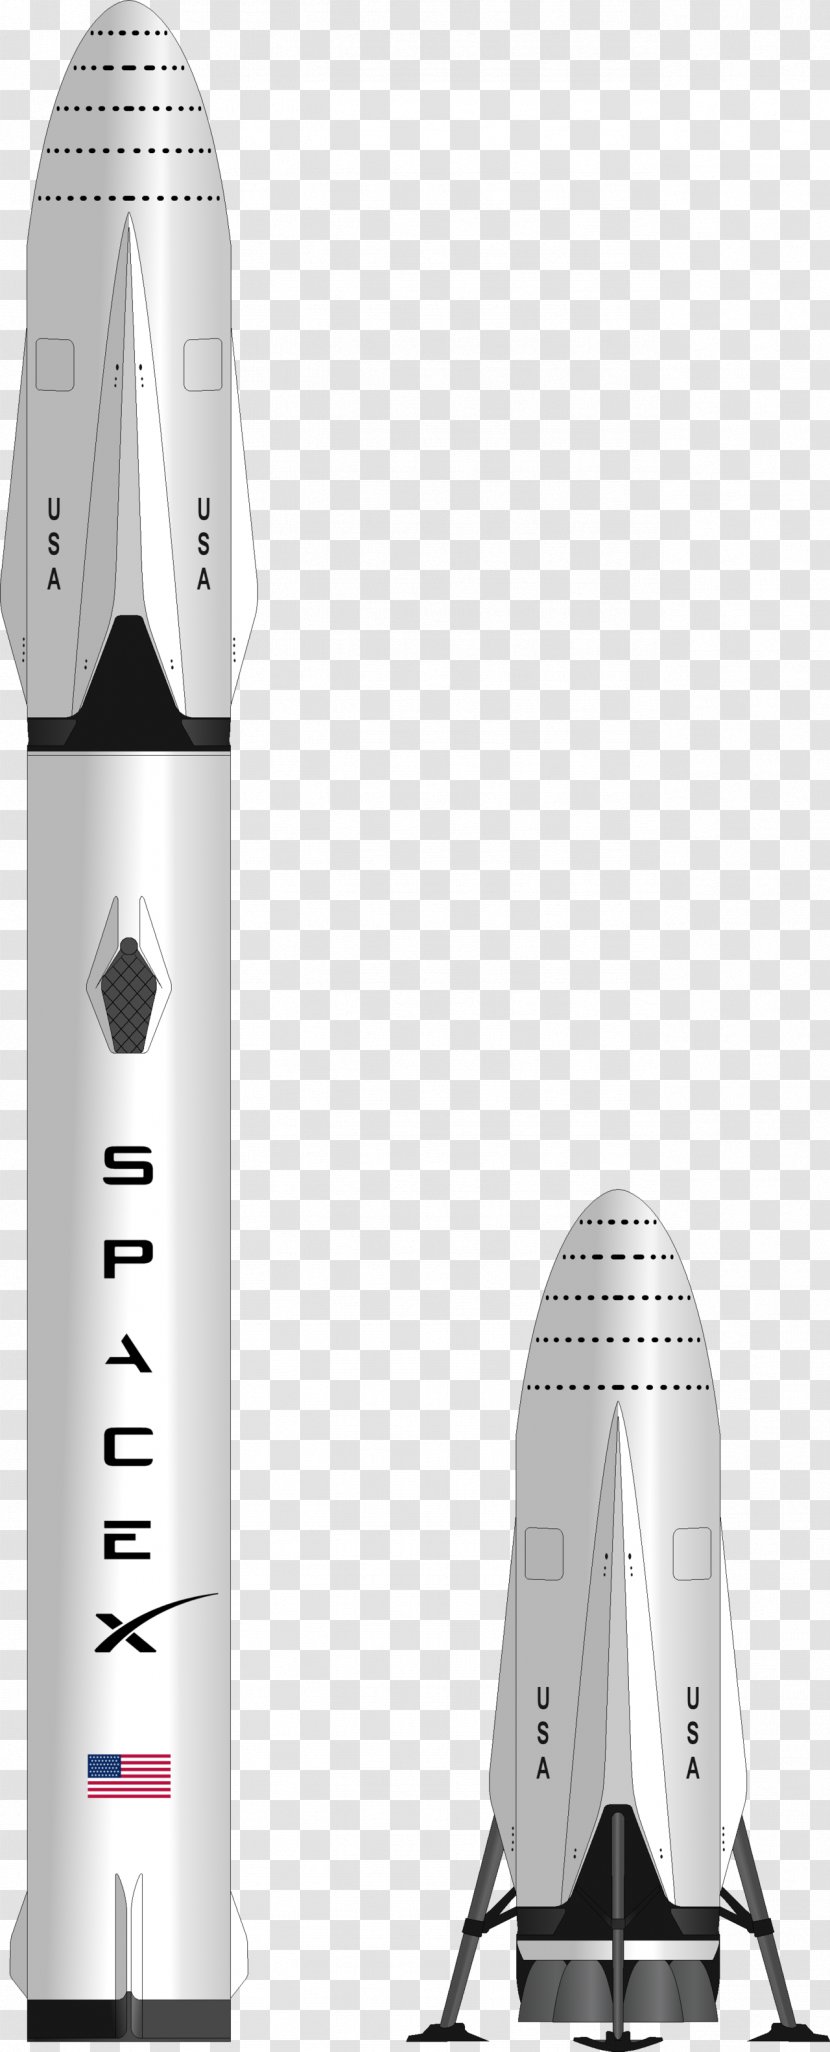 View Spacex Logo White Background Images